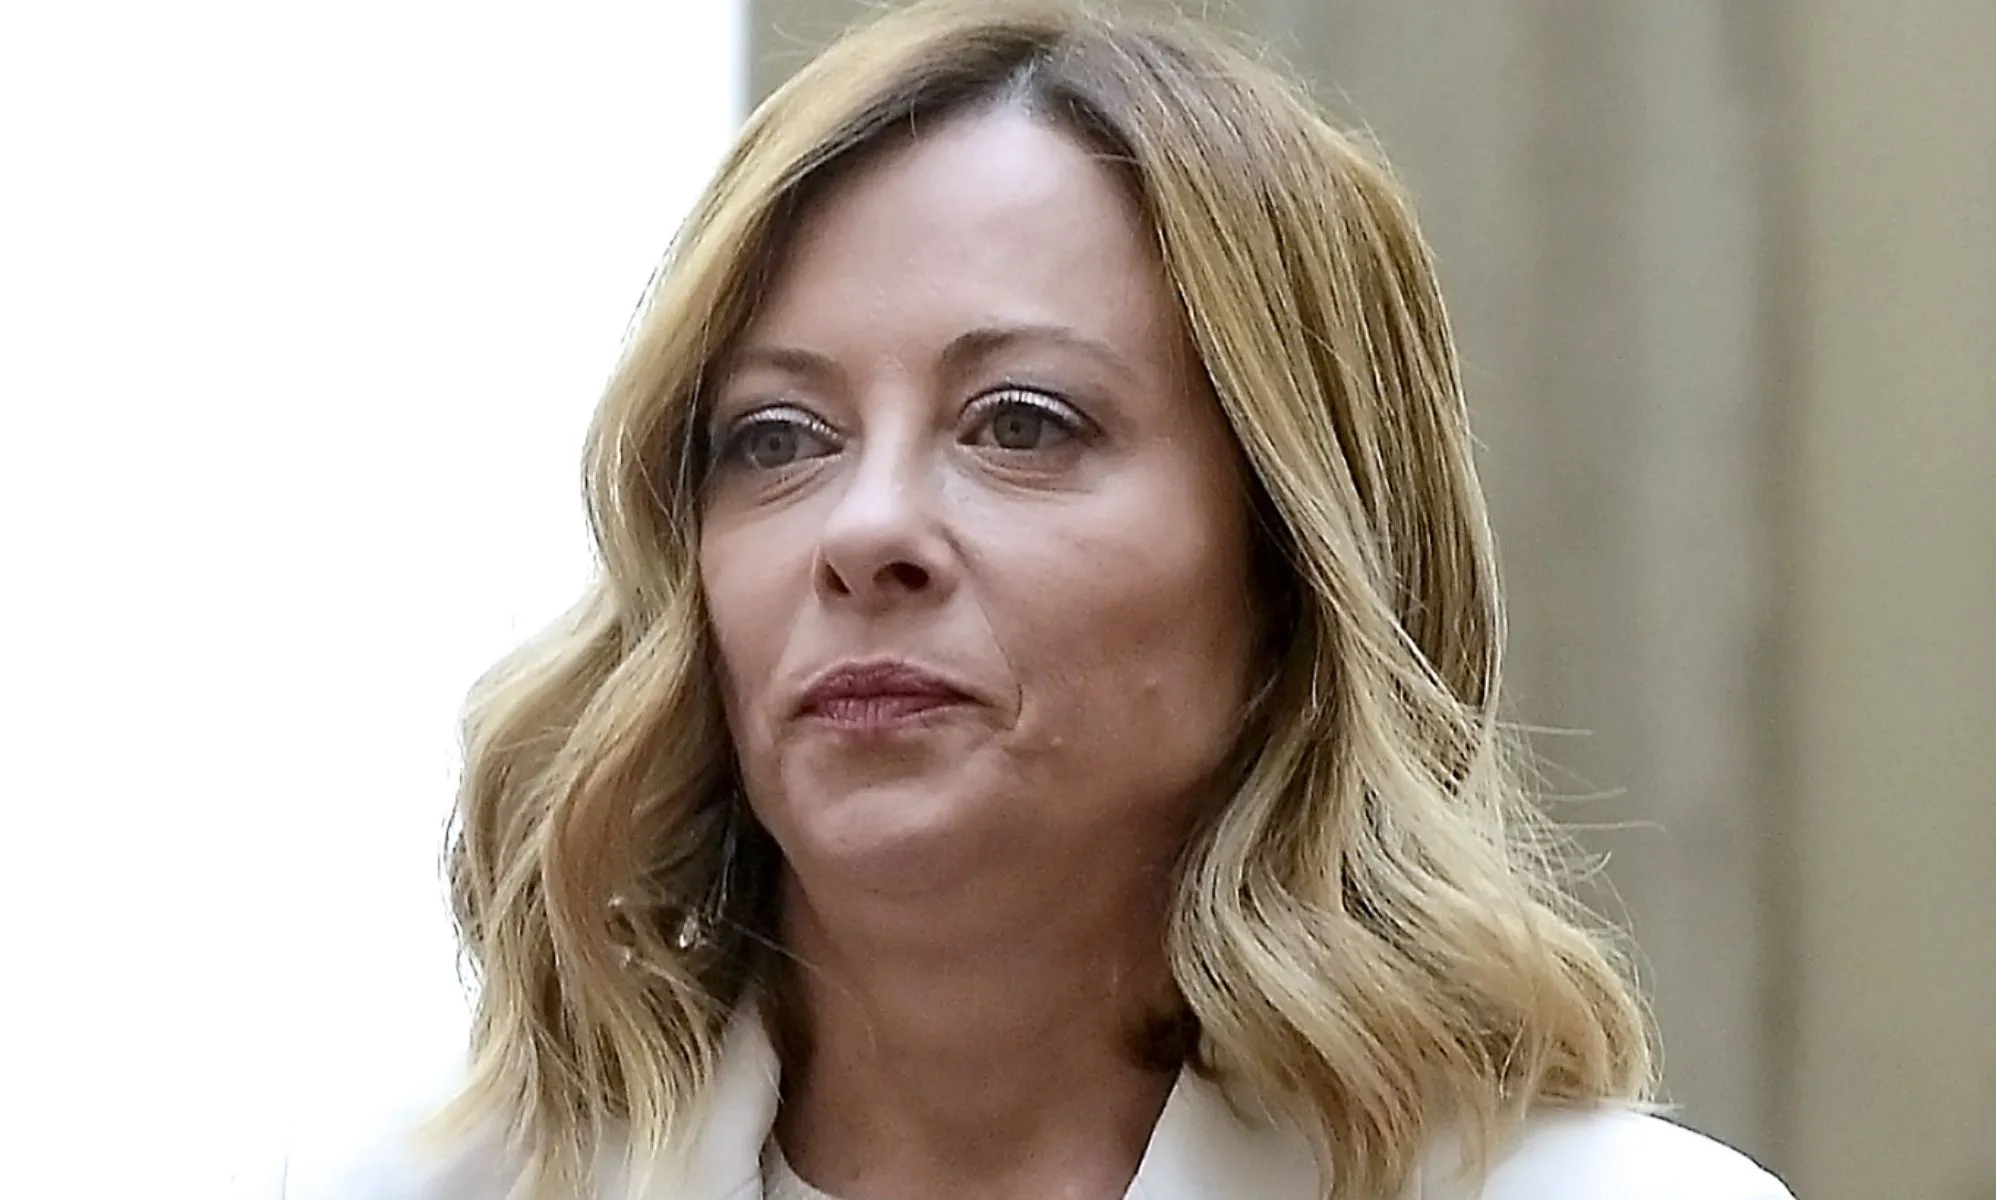 Italy’s far-right prime minister brands surrogacy ‘inhuman’ as she calls for greater penalties